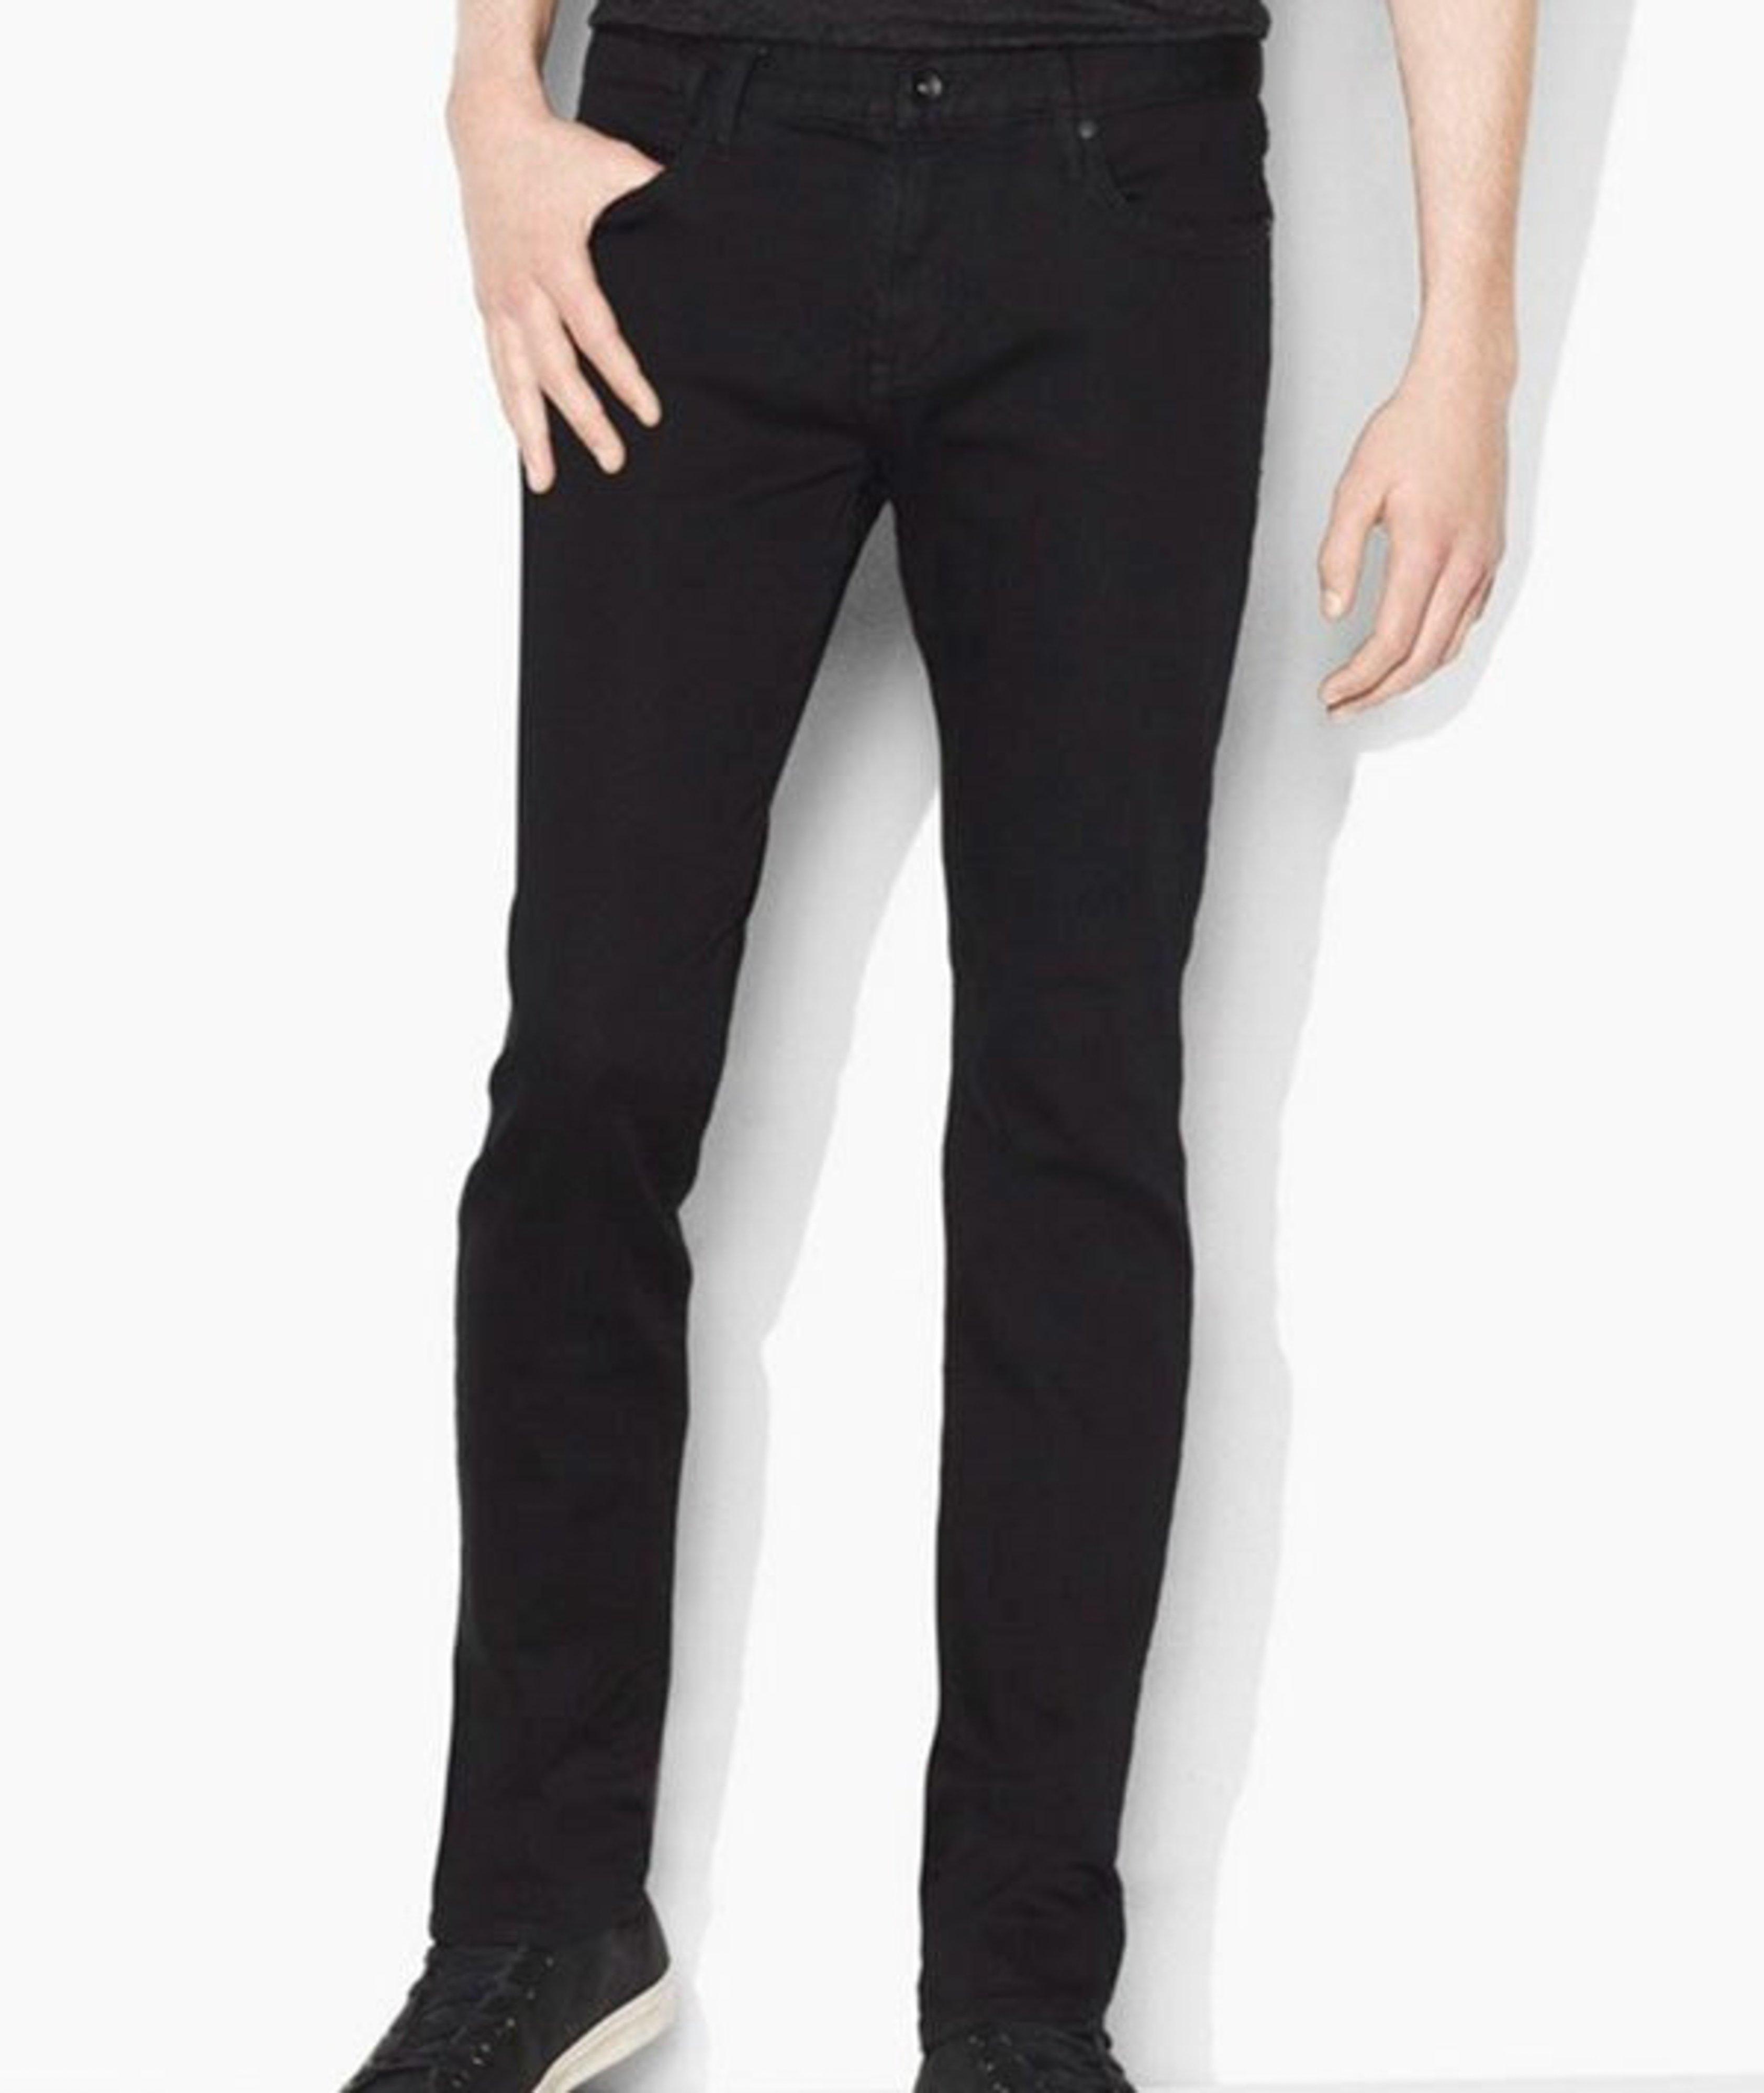 Bowery Cotton-Blend Jeans image 3